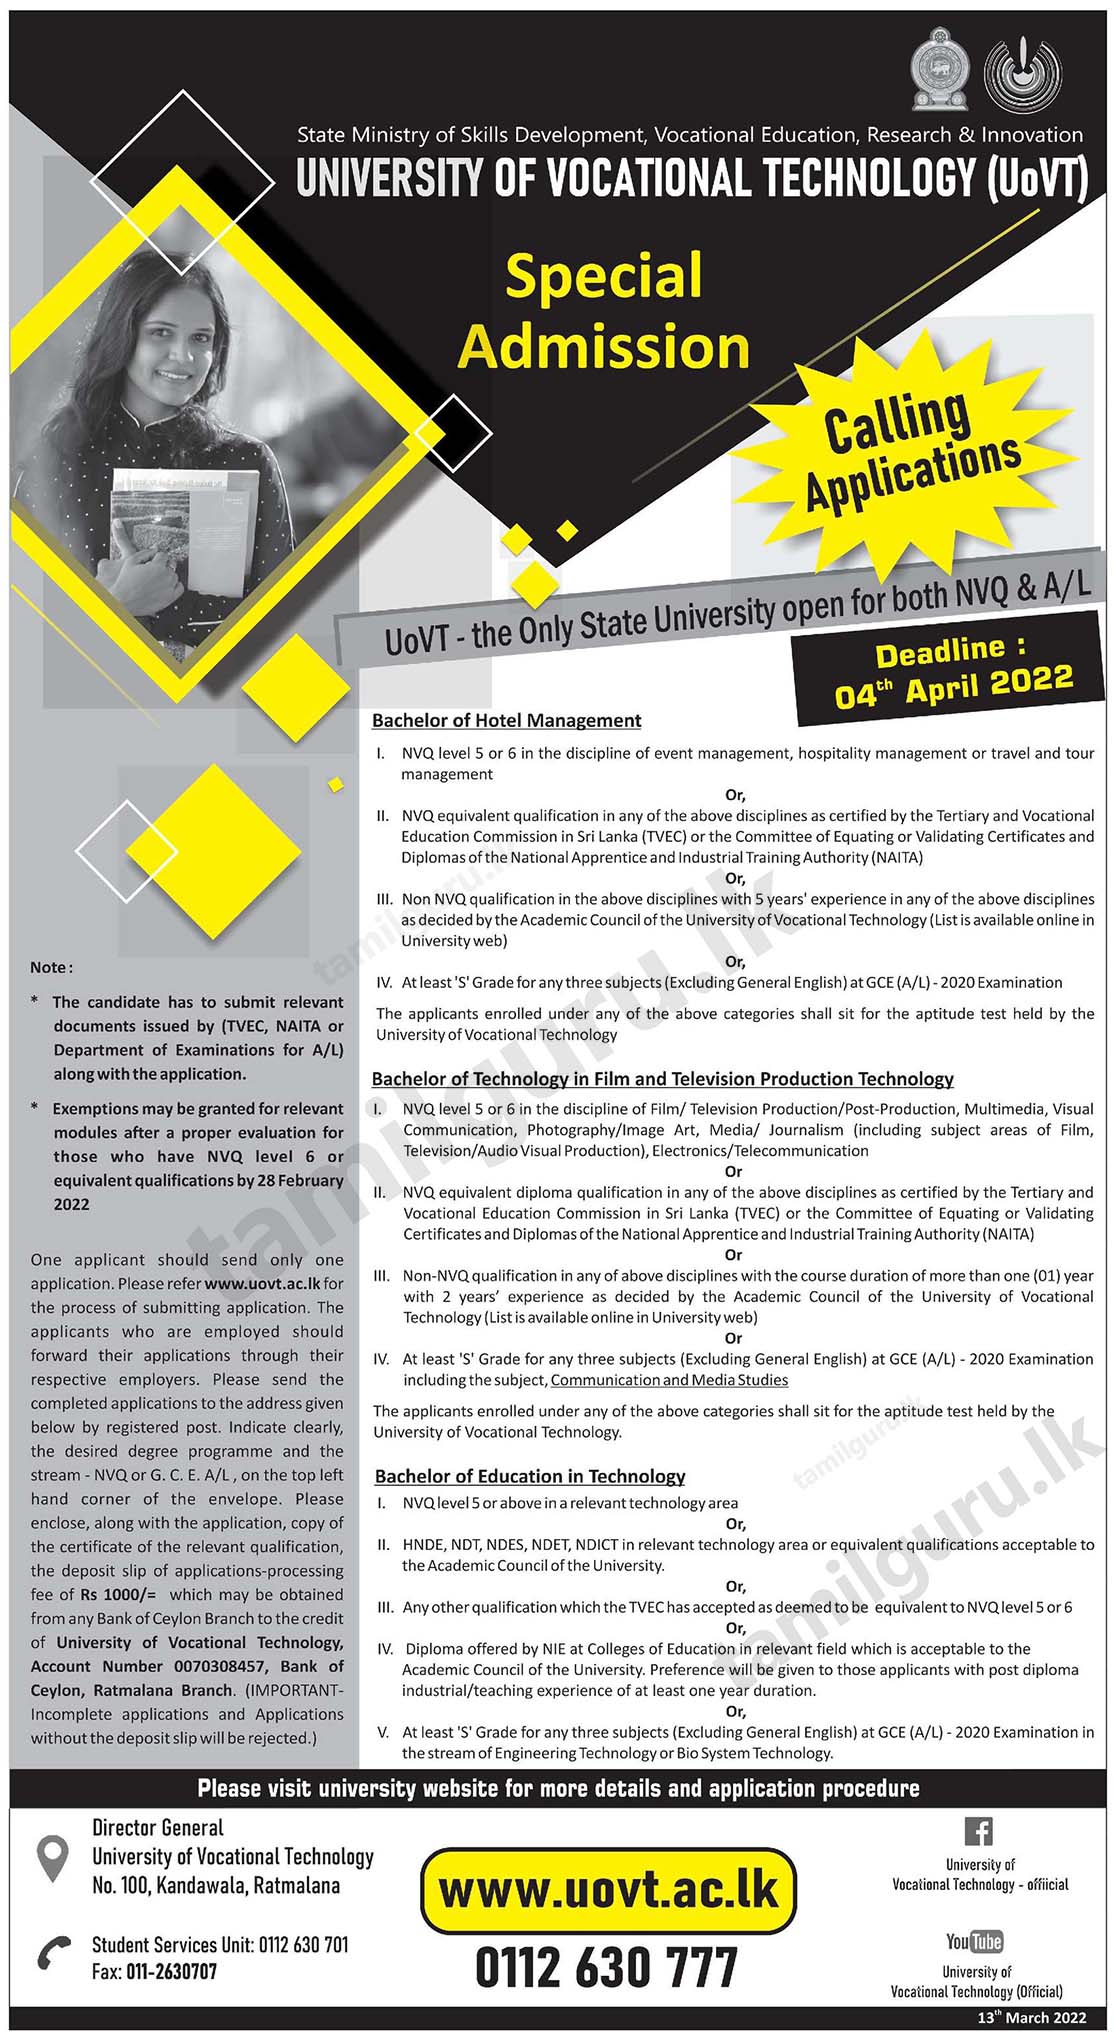 Calling Applications for Special Admission to the Degree Programmes Conducted by University of Vocational Technology (UoVT / UNIVOTEC) - 2021 (2022)